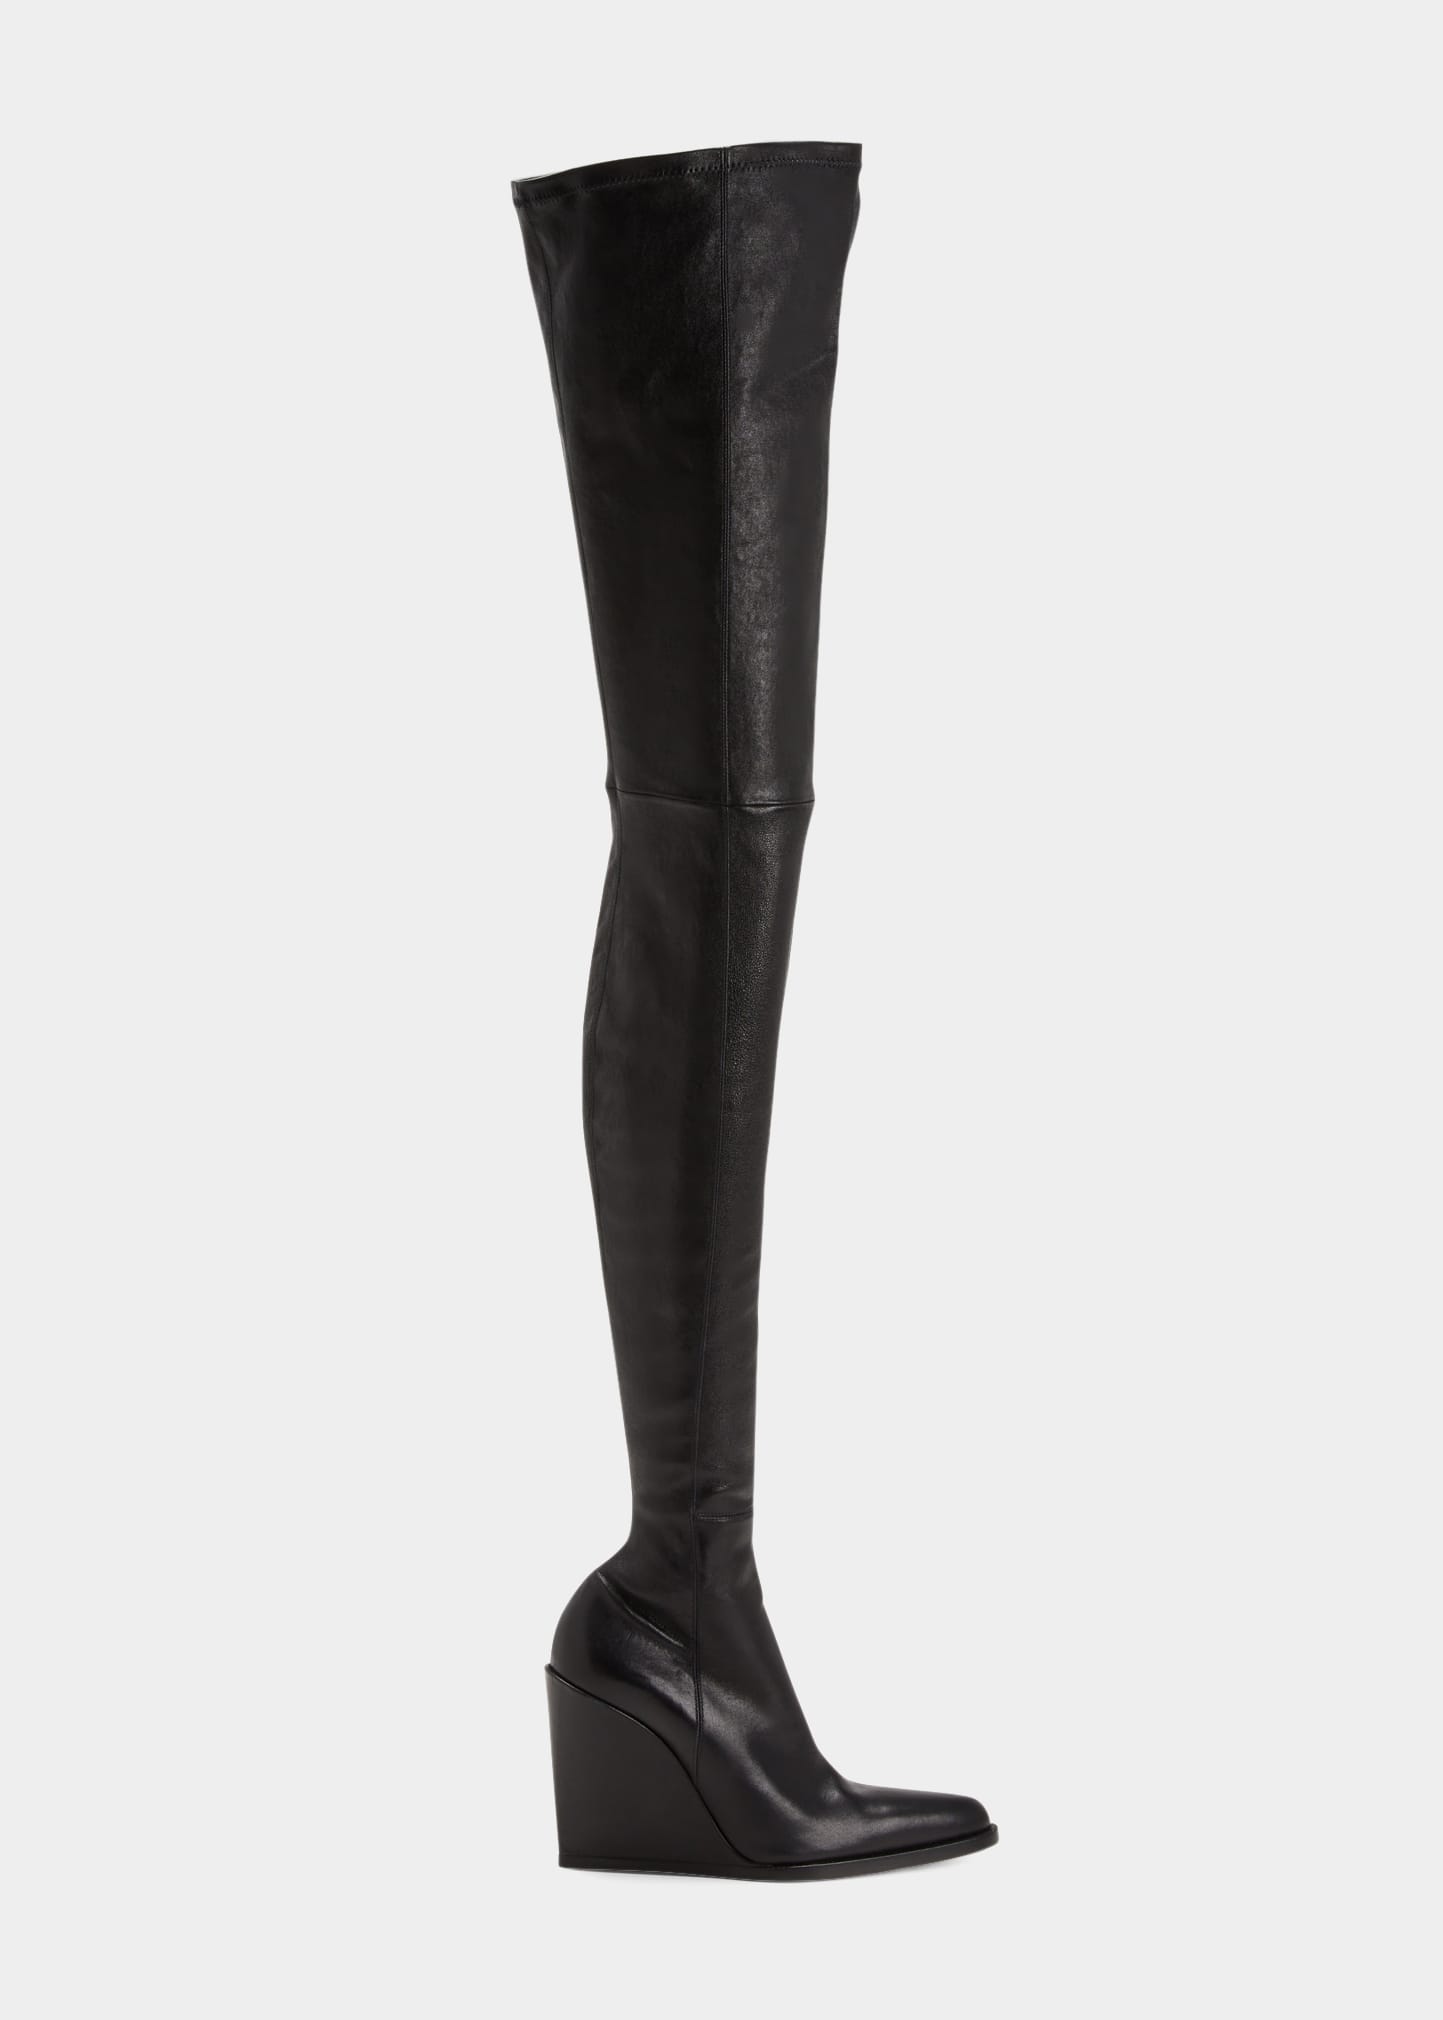 VICTORIA BECKHAM CAMILLE LAMBSKIN WEDGE OVER-THE-KNEE BOOTS